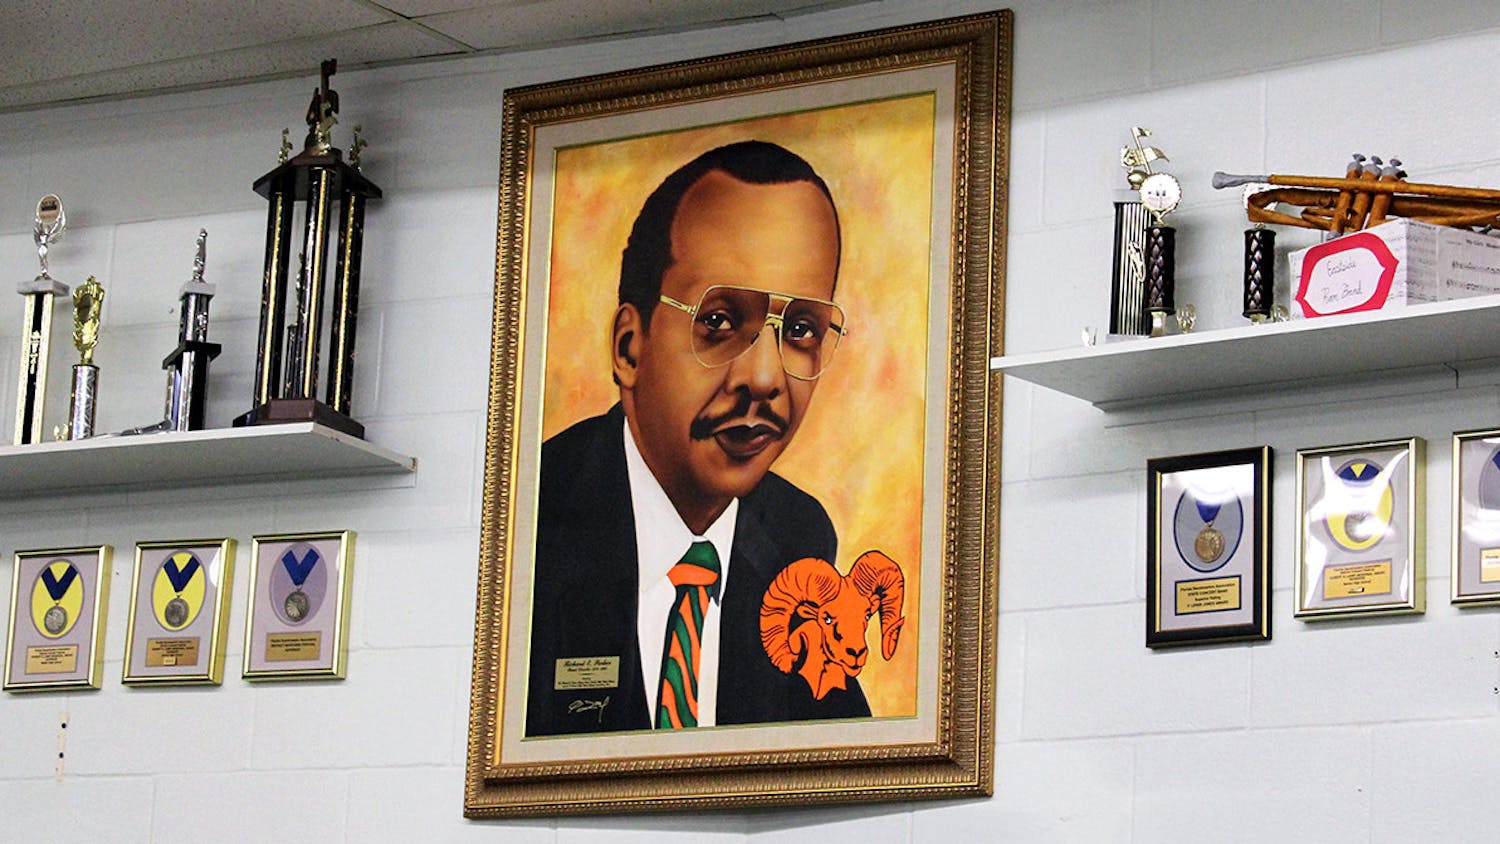 A portrait of former band director Richard E. Parker hangs inside the band room at Eastside High School on Friday, Feb. 12, 2021. Parker was the Eastside marching band director from 1970 to 1990.